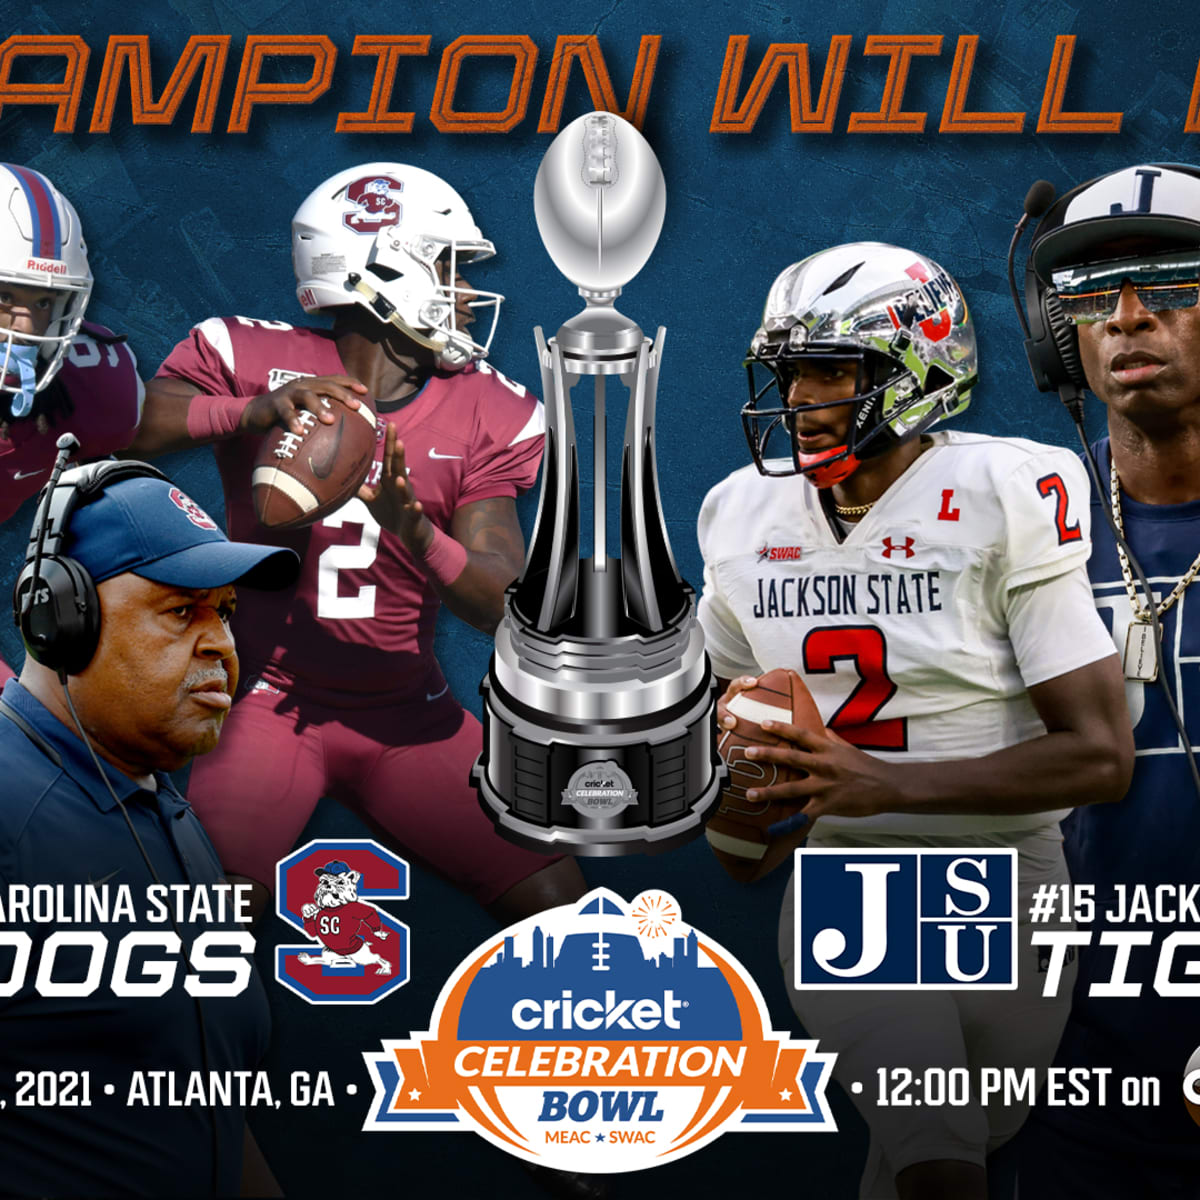 Celebration Bowl The Revolution will be Televised, A New Champion Will Rise in HBCU Football